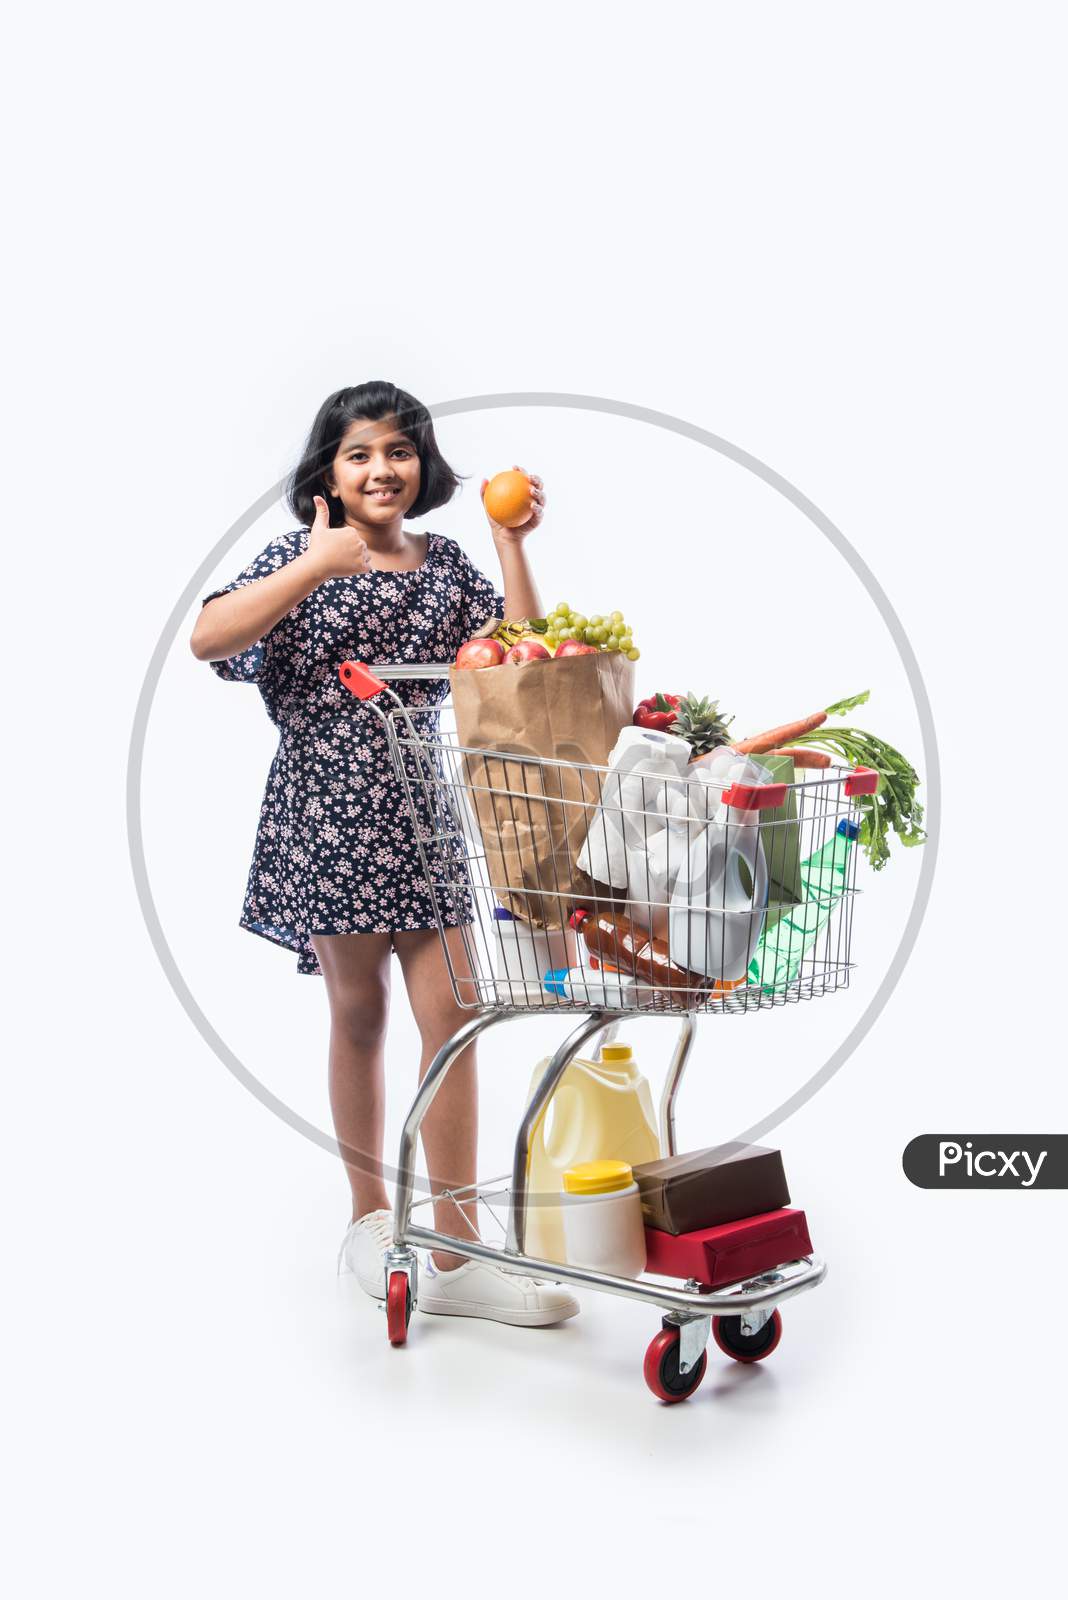 Indian Small Girl With Shopping Cart Full Of Groceries, Vegetables And Fruits